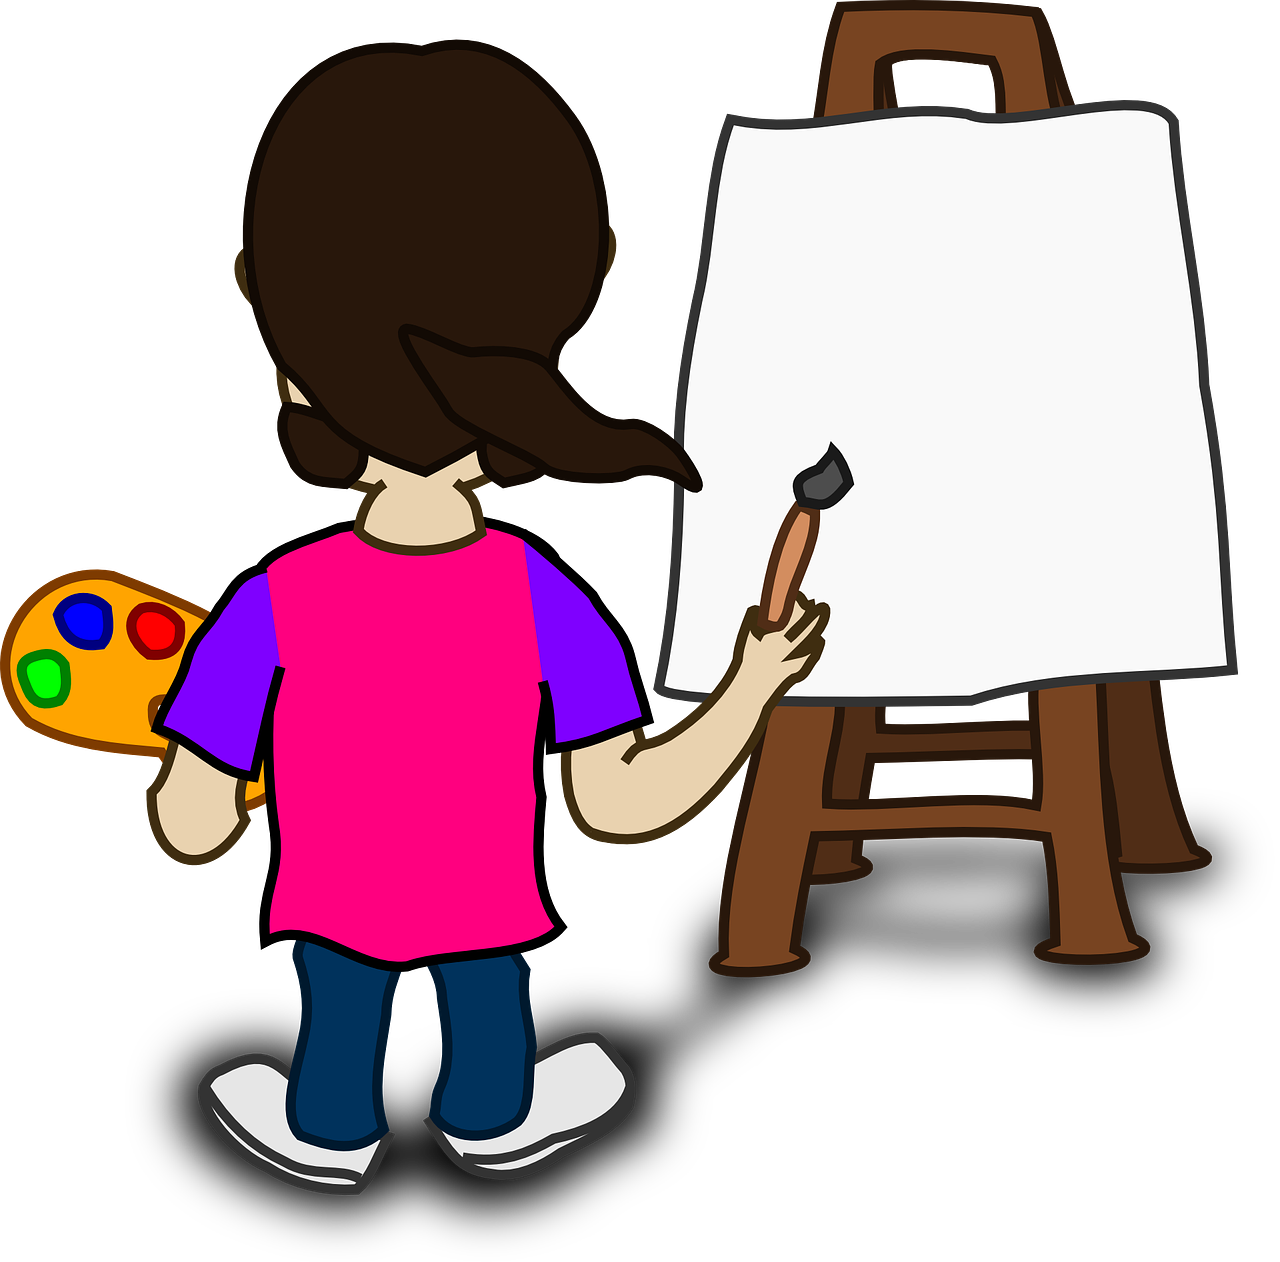 Easel and brushes with paint art lessons Vector Image